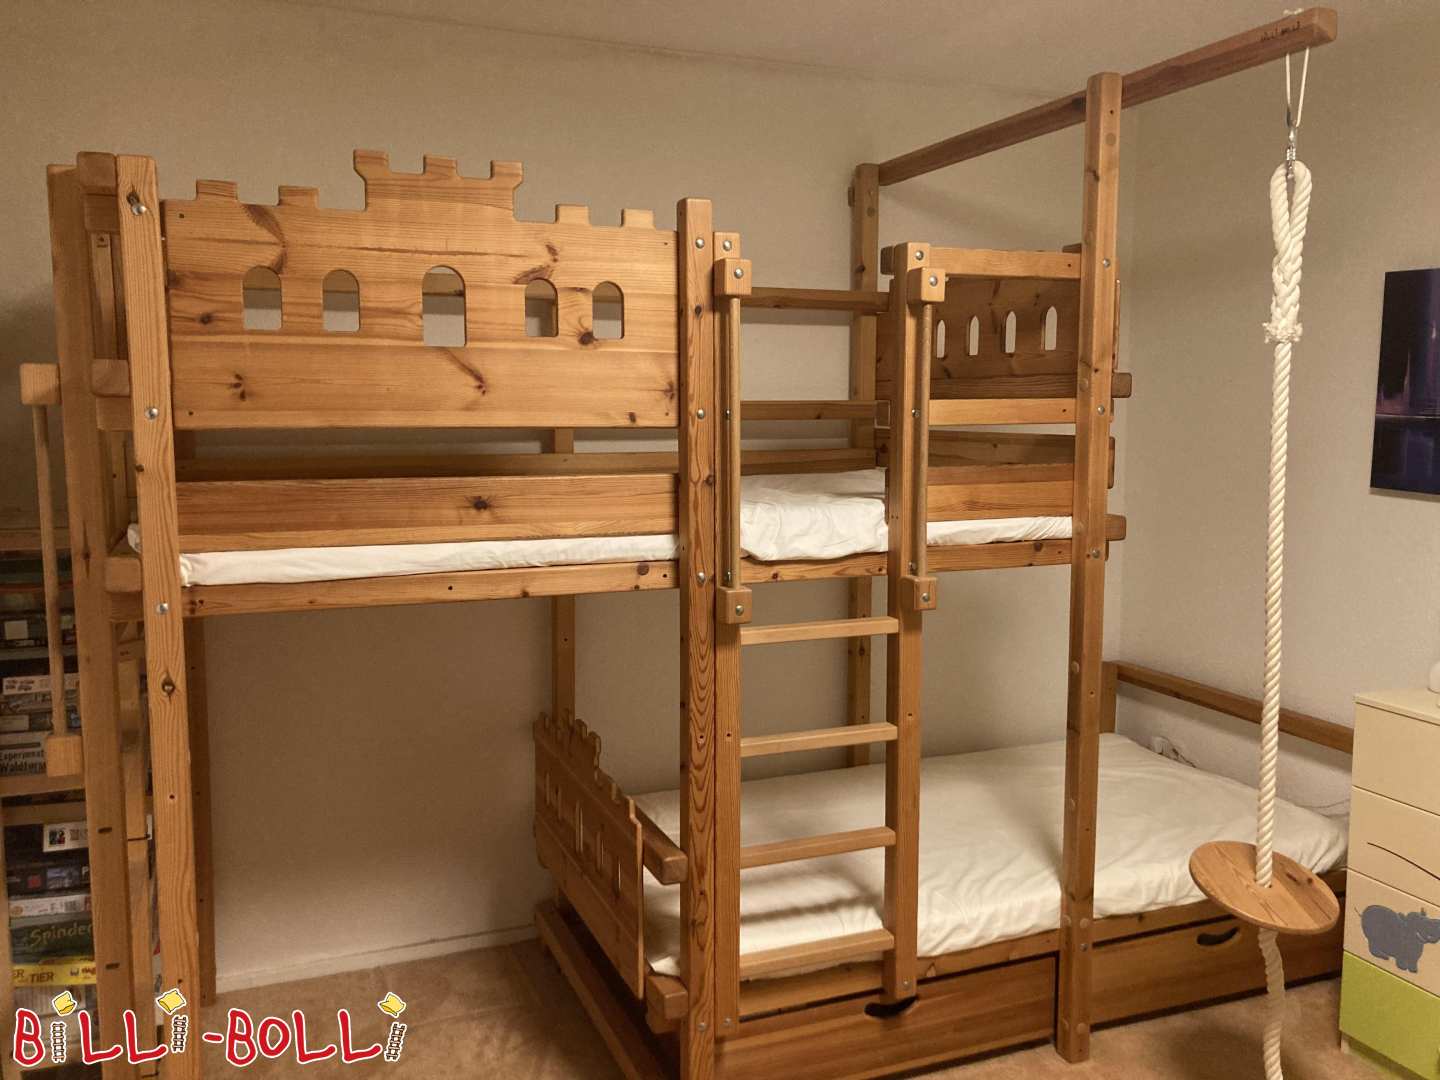 Bunk bed offset laterally with knight's castle decoration in Kiel (Category: Bunk Bed Laterally Staggered pre-owned)